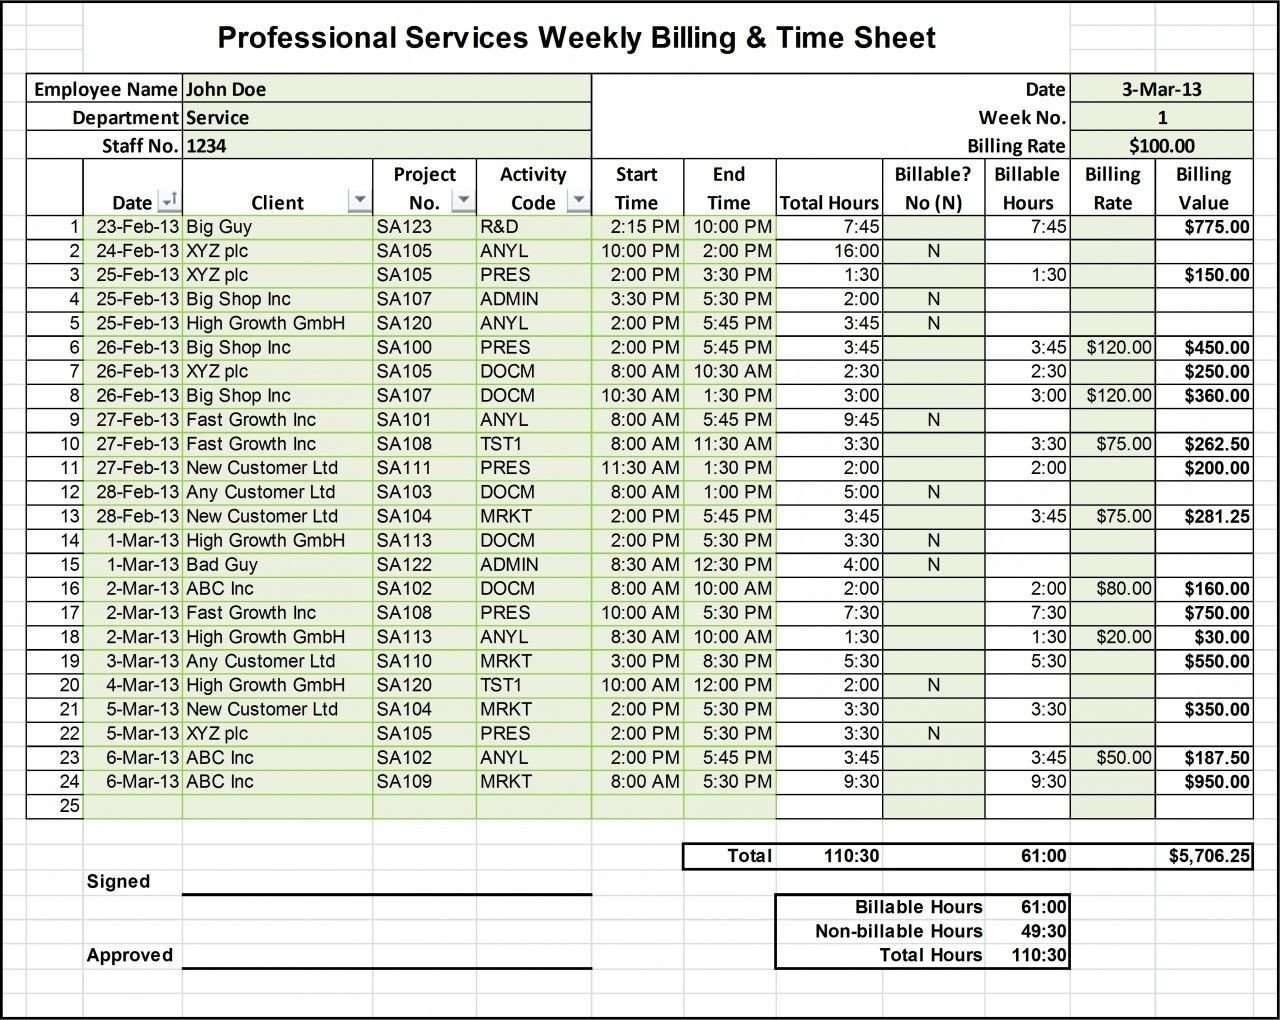 Excel Billing Timesheet Templates for Professional